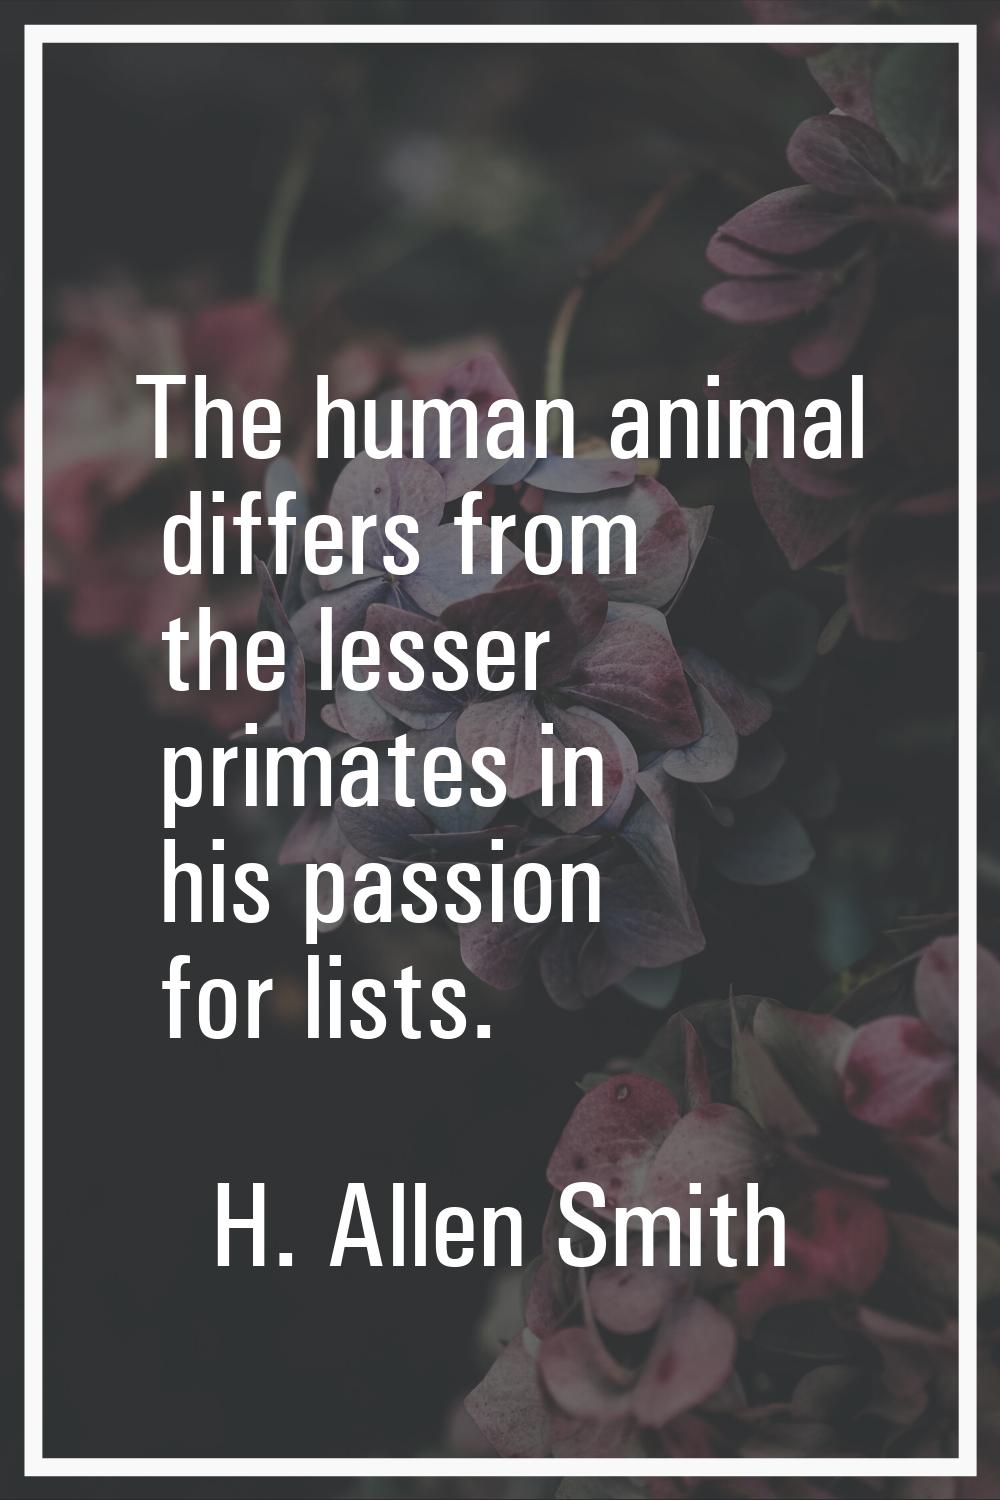 The human animal differs from the lesser primates in his passion for lists.